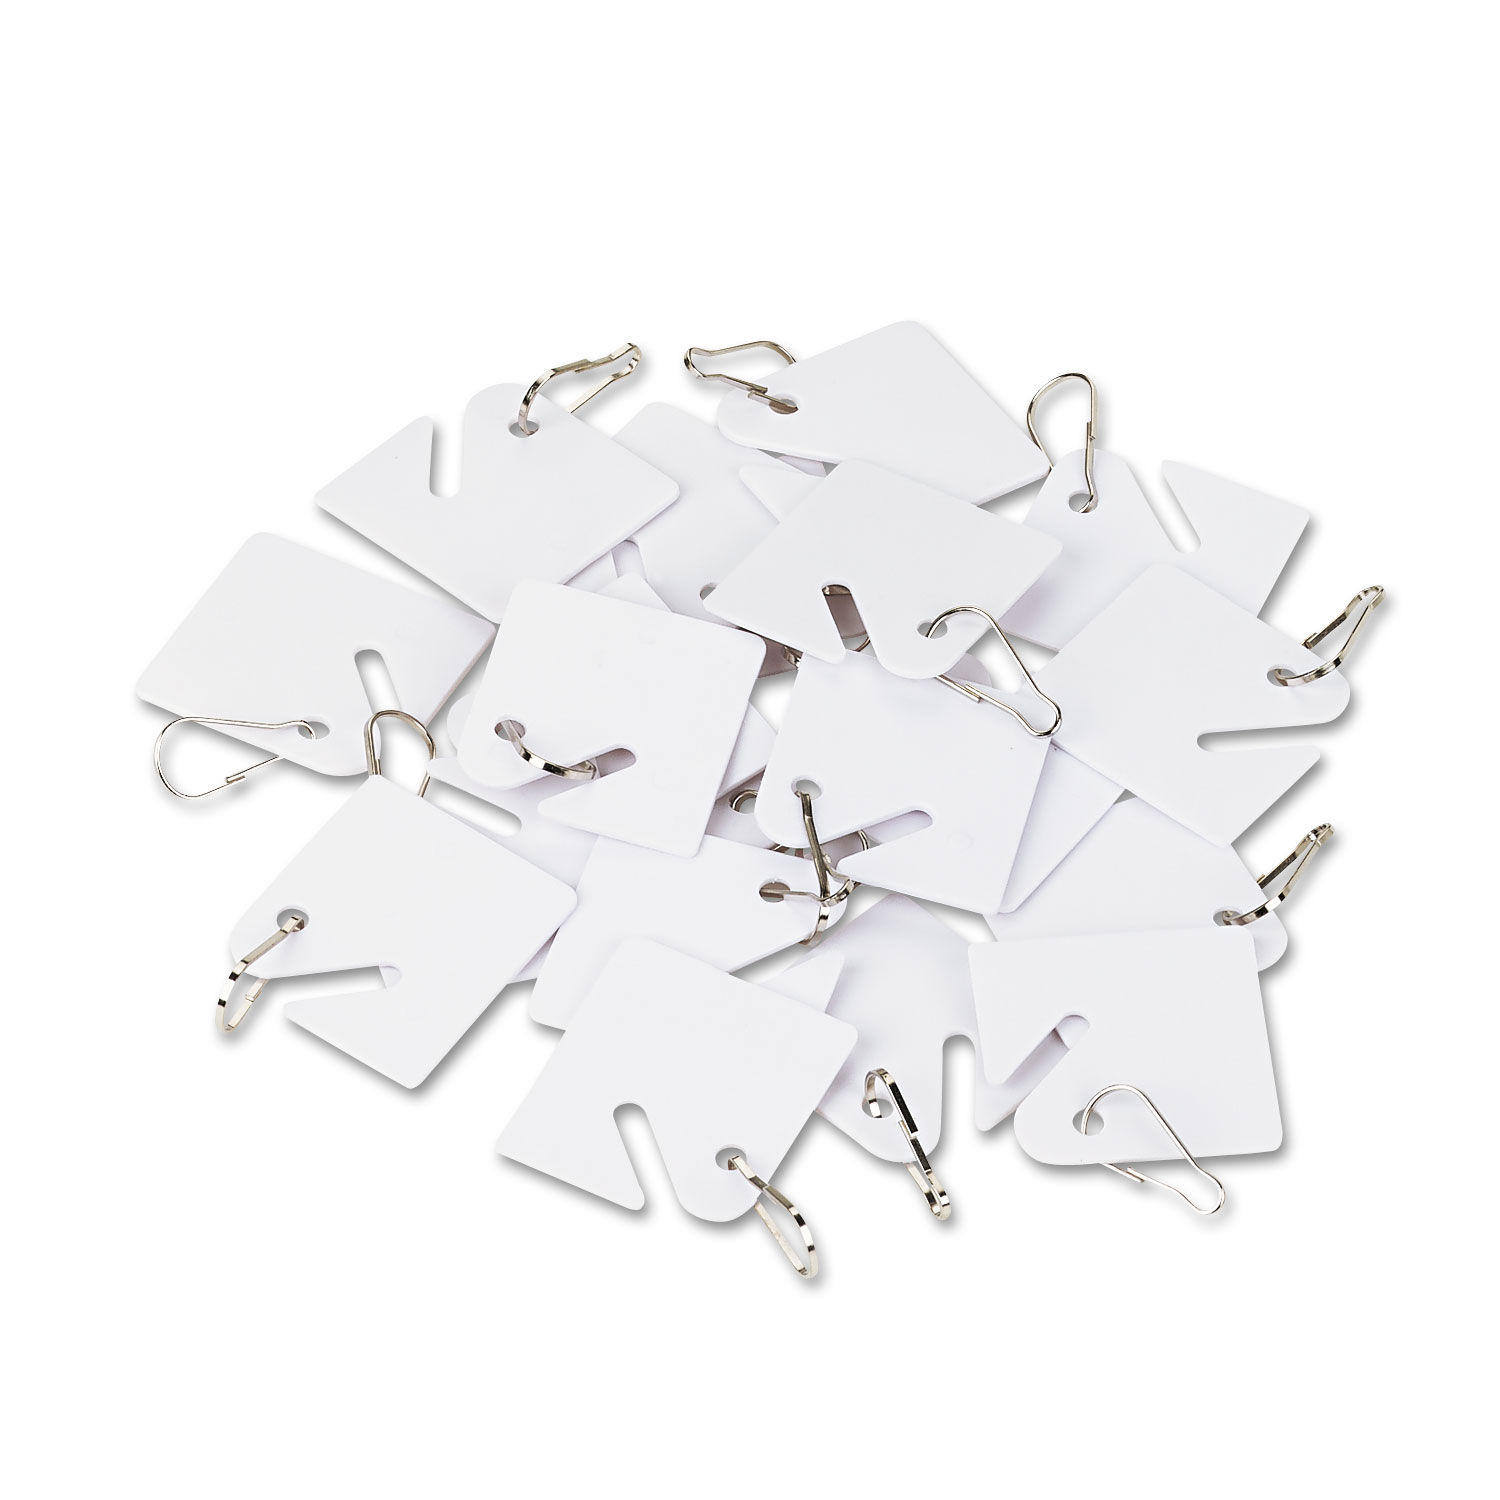 Replacement Slotted Key Cabinet Tags 1.63 x 1.5, White, 20/Pack